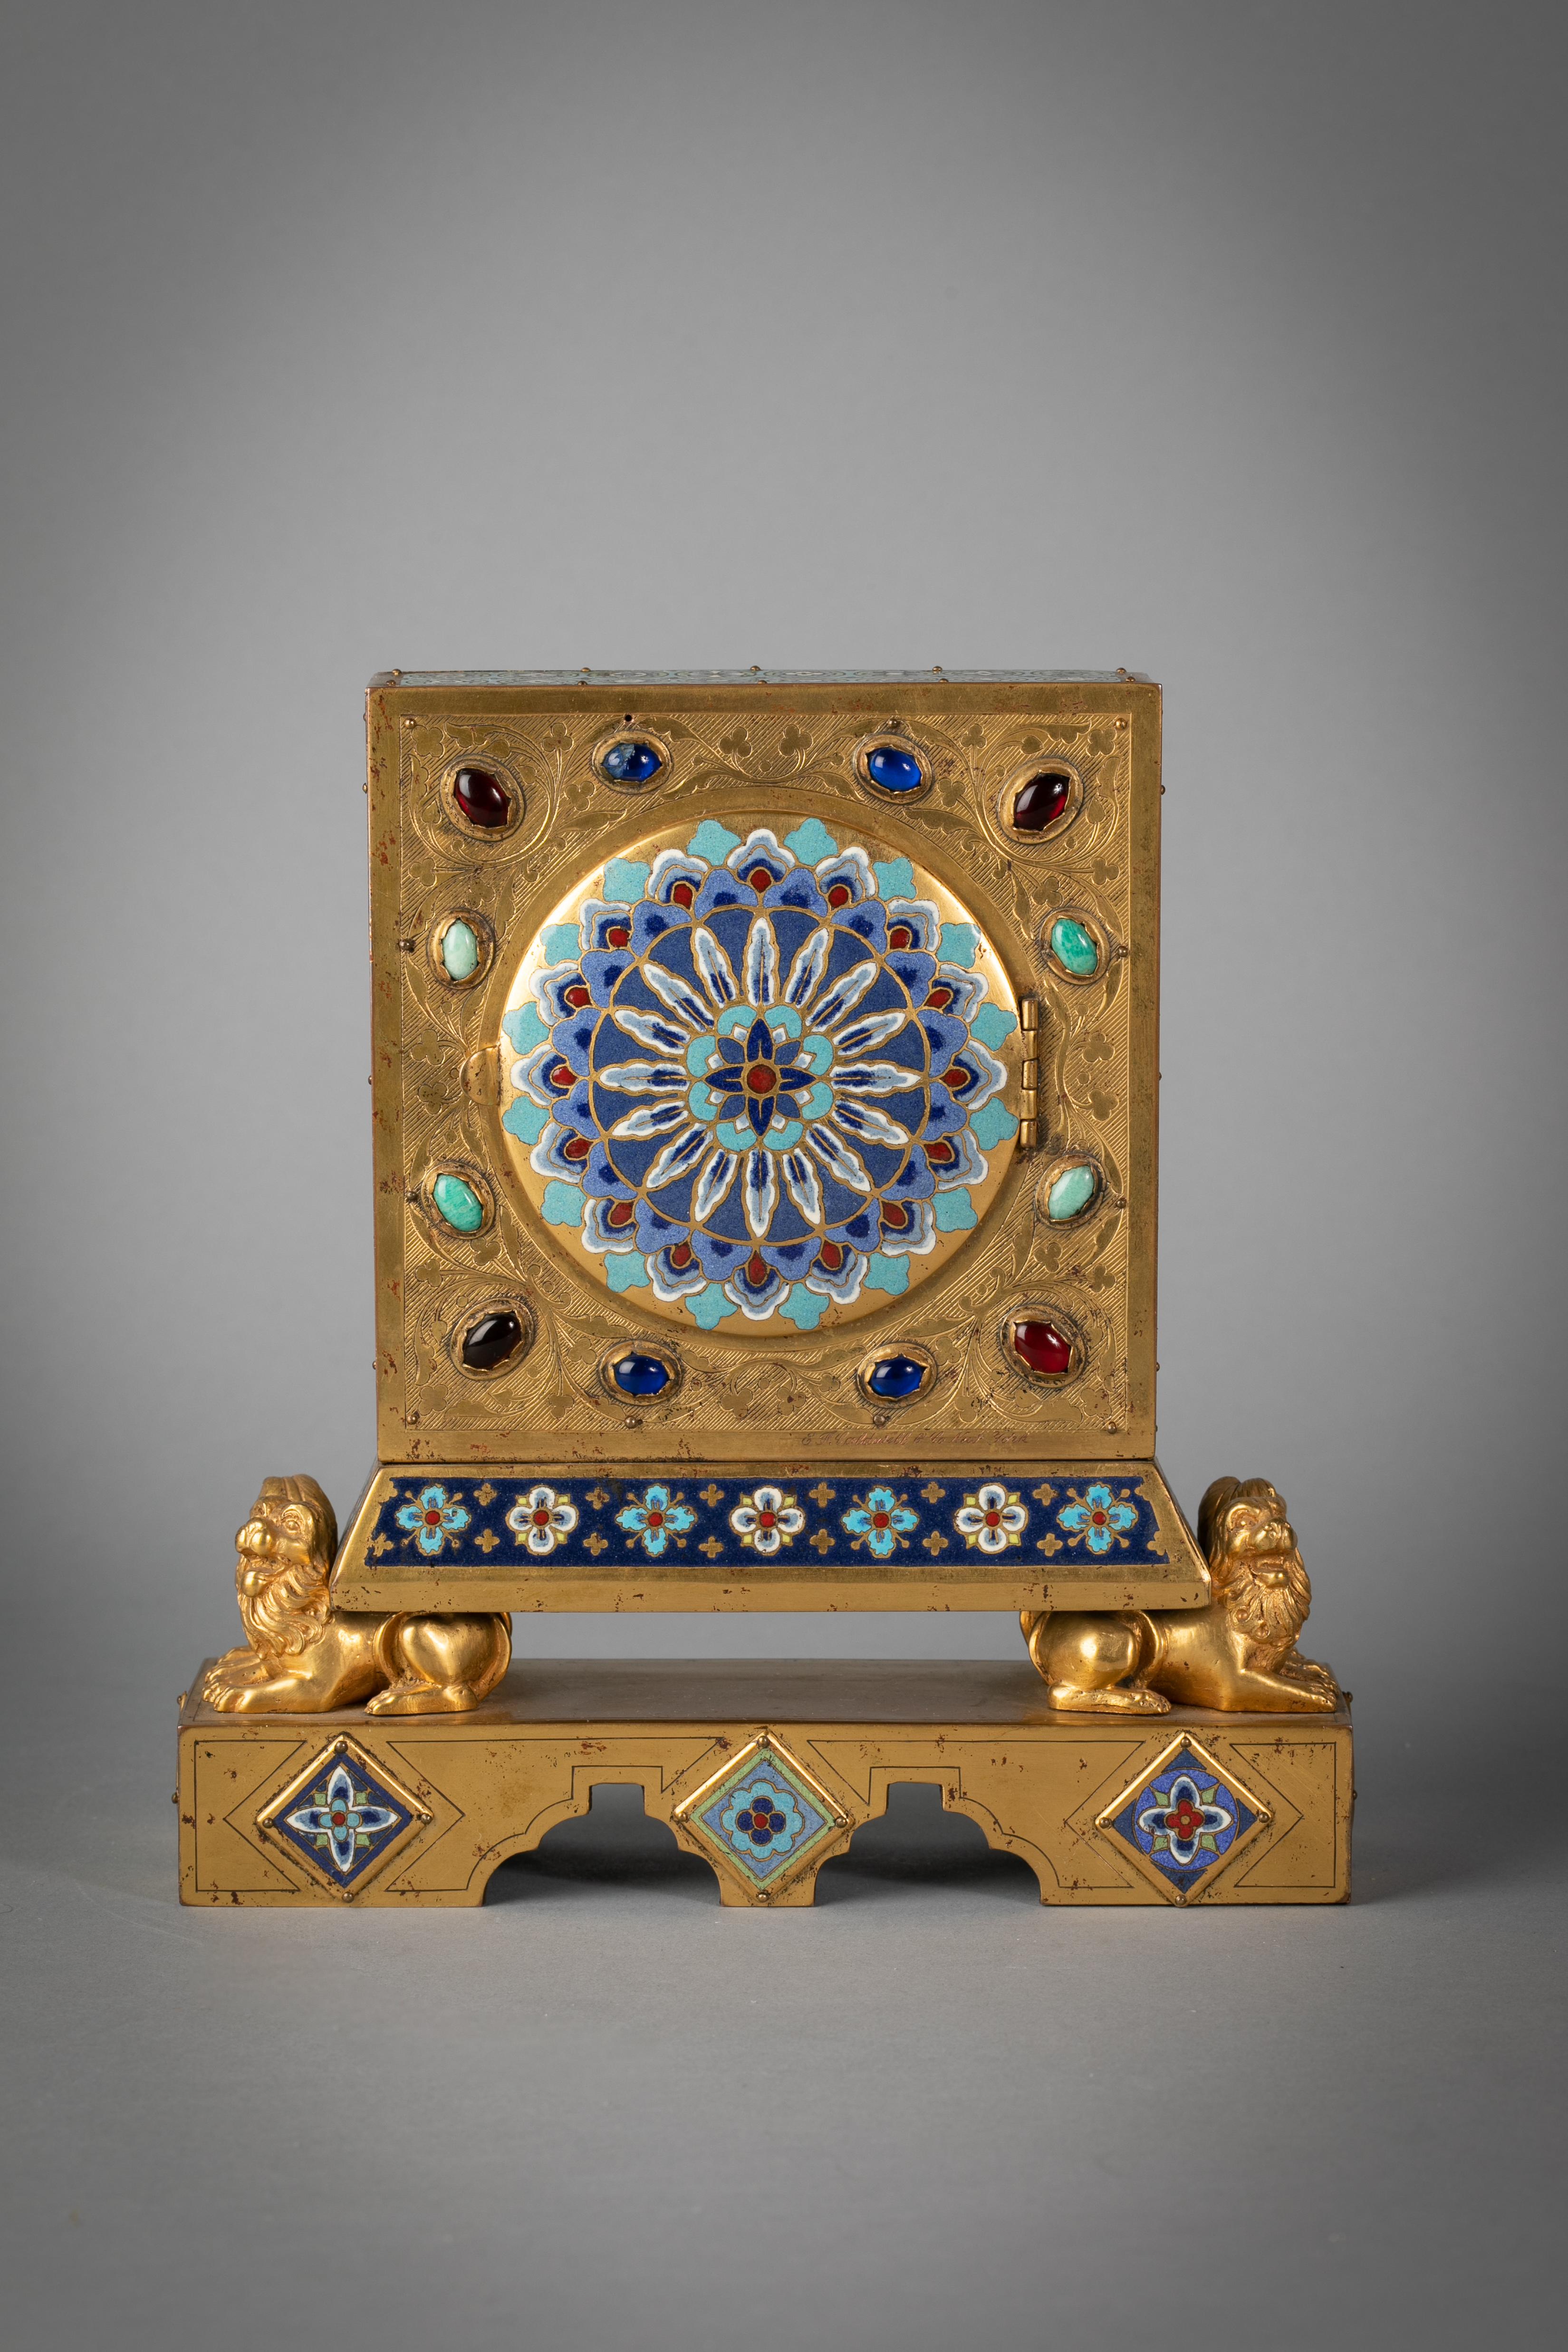 The face of the clock surrounded by eight applied panels (four round and four rectangular), All surmounted on the backs of four lions, above a platform with additional applied plaques, the back similarly decorated and studded with stones. Signed